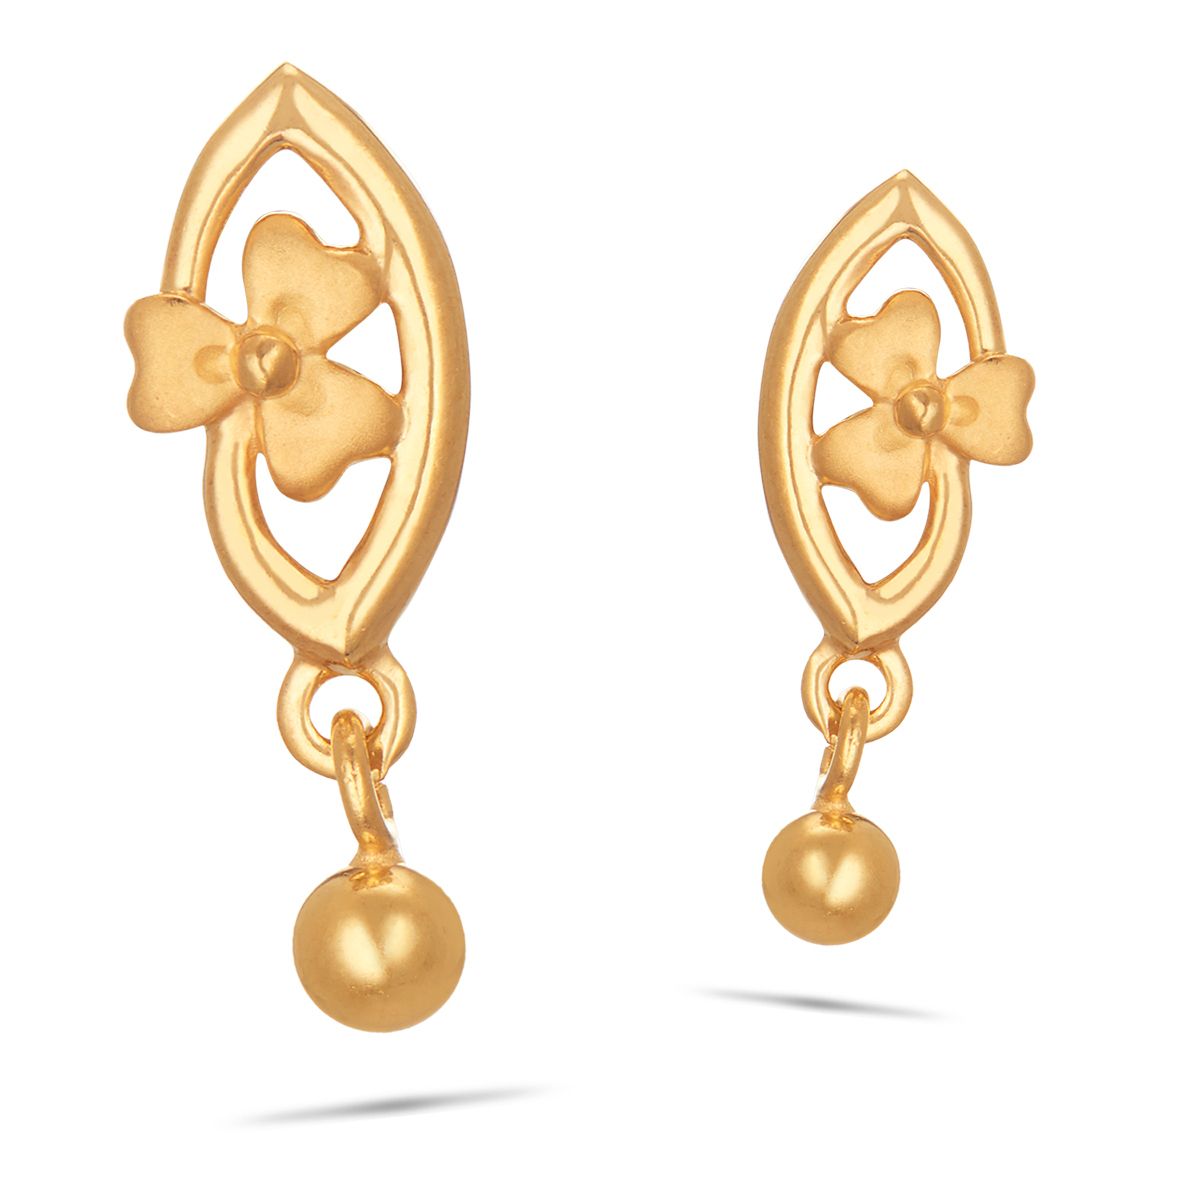 Flawless Candle Melt Chain Drops Gold Earrings | Jewelry Online Shopping |  Gold Studs & Earrings